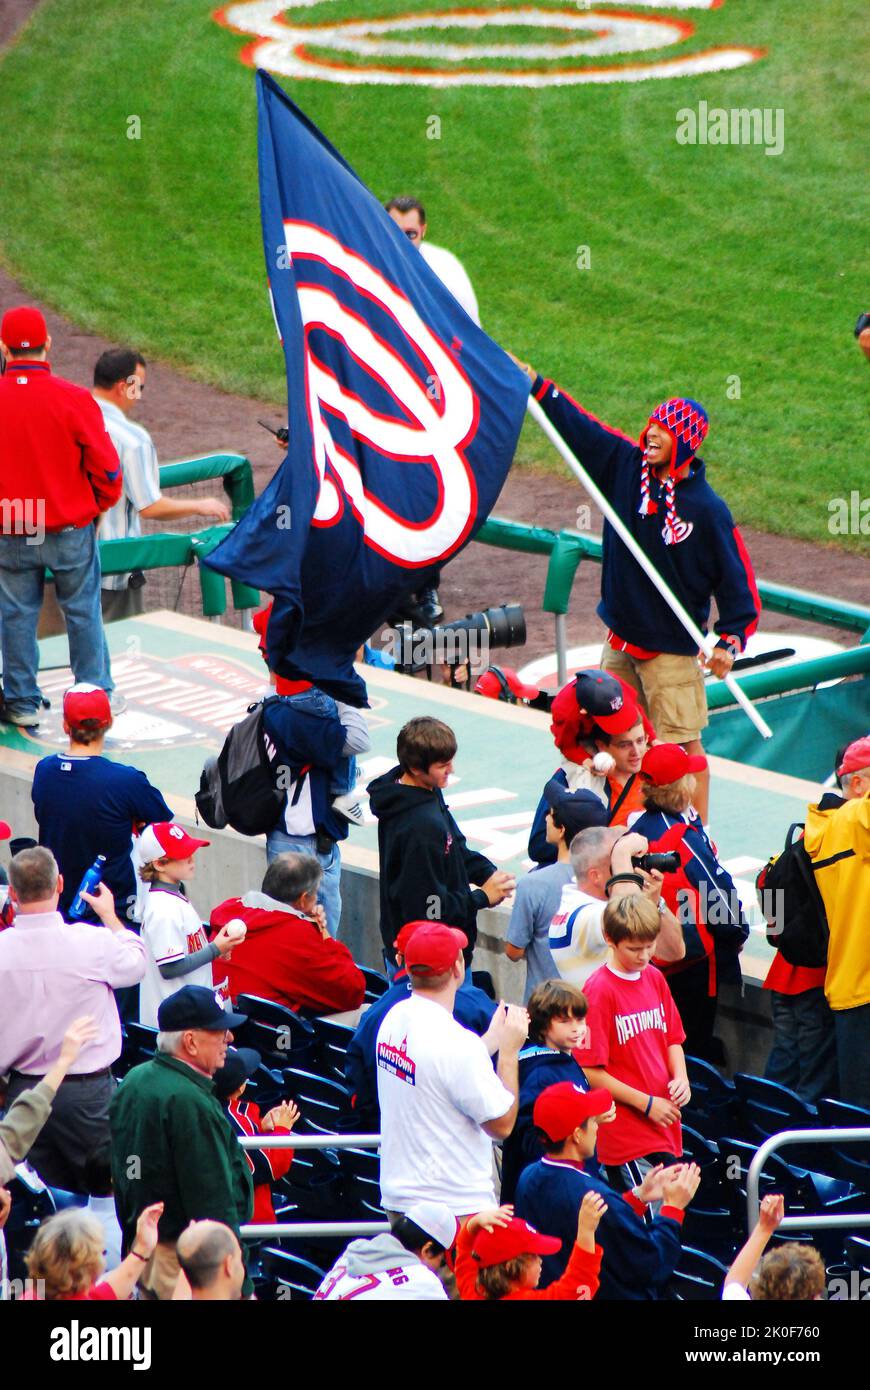 A man stands on top of the dugout at Washington Nationals ballpark, waving the baseball team's flag to lead the crowd in cheering for the club Stock Photo